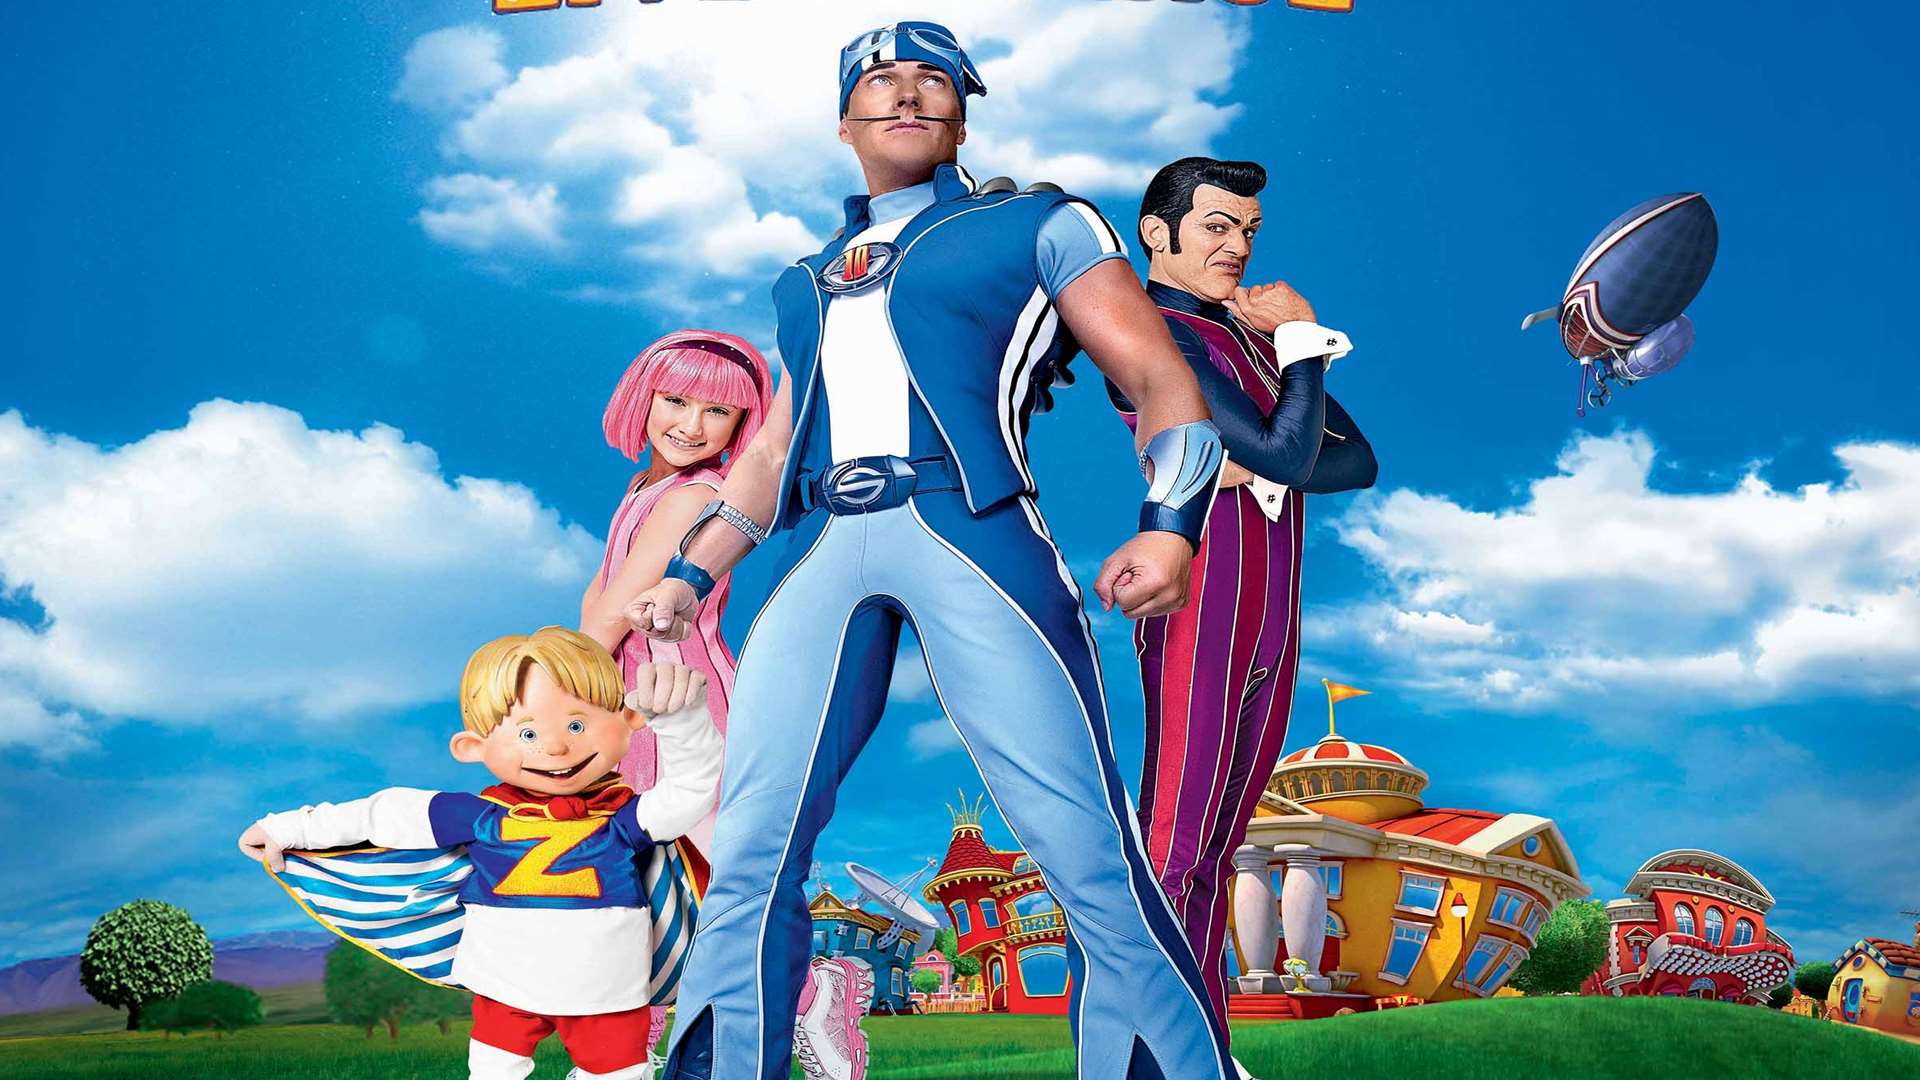 LazyTown is a non-stop energetic treat for the whole family. Showing Tuesday, August 30